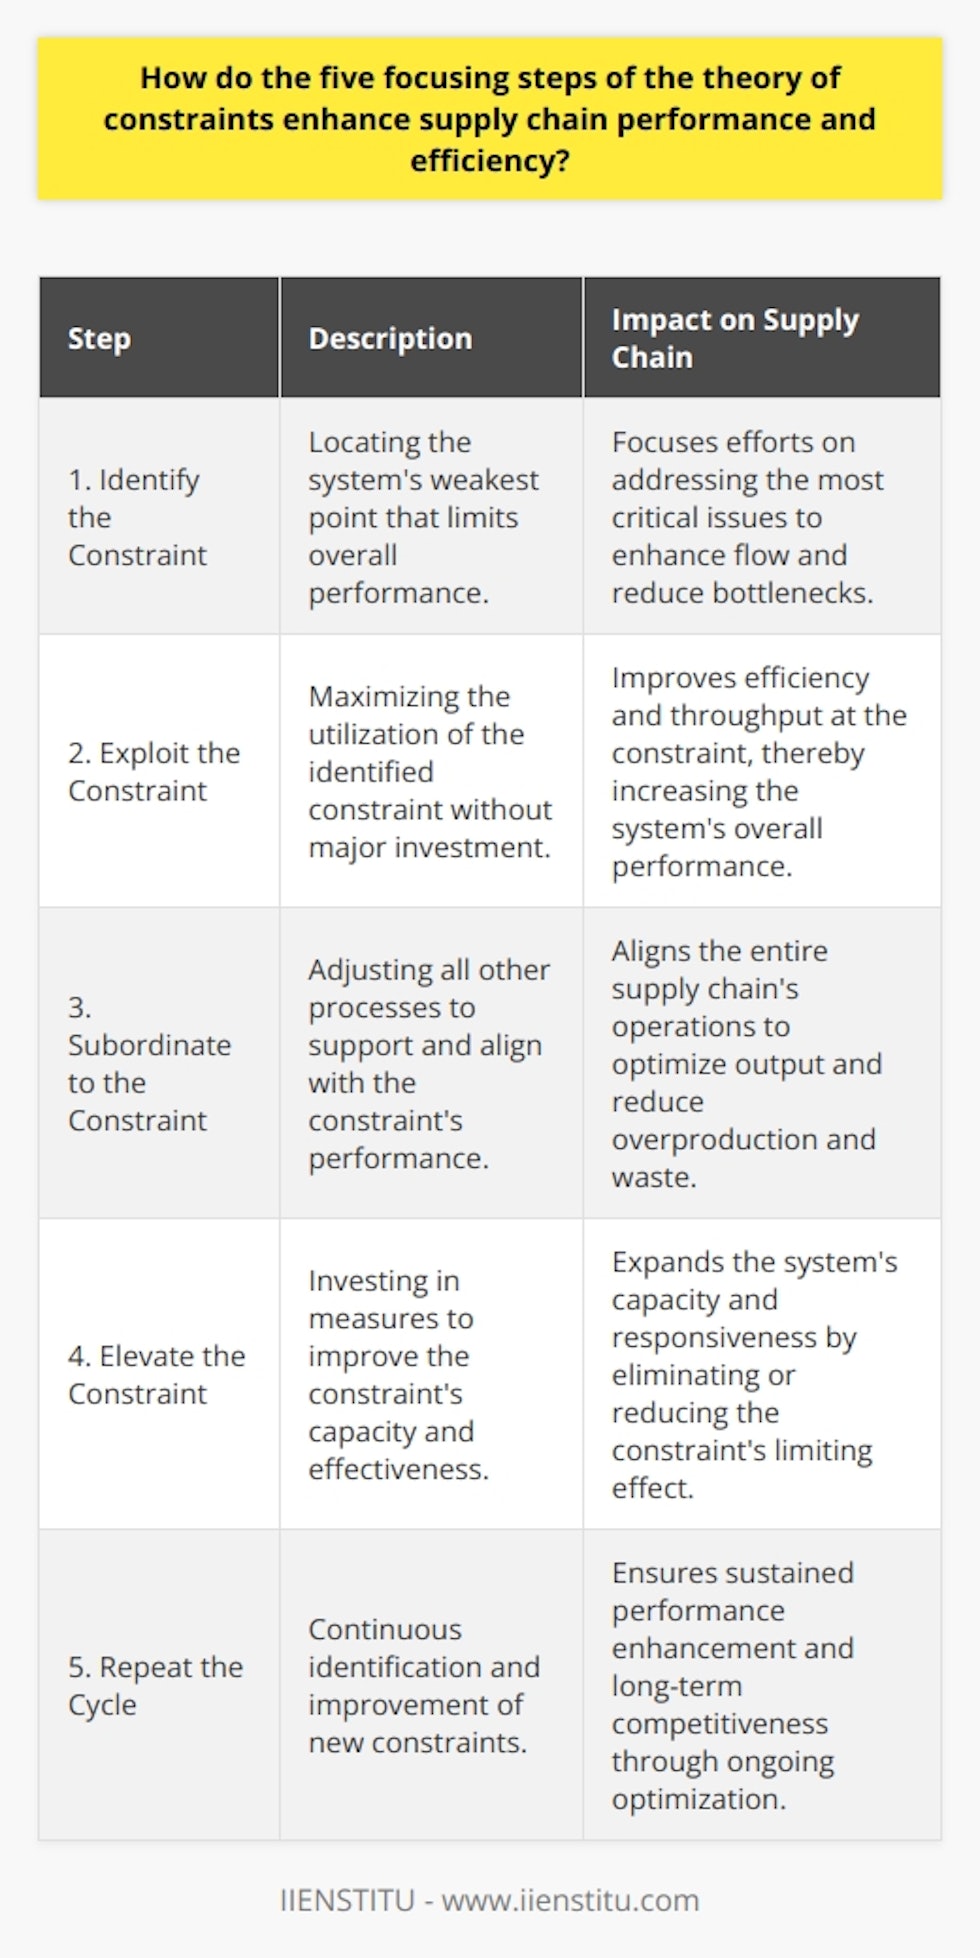 The Theory of Constraints (TOC) provides a strategic approach to managing systems, which is particularly applicable to supply chain optimization. By methodically applying the TOC’s Five Focusing Steps, businesses can enhance the performance and efficiency of their supply chains. Here’s how each step contributes to this improvement:1. Identify the Constraint:Finding the weakest link in the supply chain is critical – be it a slow production step, inadequate shipping capacity, or a shortfall in raw materials. Recognizing this limiting factor, or constraint, is the pivot upon which all the improvements hinge. In supply chains, constraints can often result from limited market demand, machine capacity, supplier performance, or policy constraints. By identifying the specific bottleneck, organizations can focus on making effective changes that oversee the greatest potential to enhance flow and efficiency.2. Exploit the Constraint:After identifying the constraint, organizations should exploit it to its fullest. This means making sure that the constraint is never wasted and always focused on the most critical tasks. Any inefficiency at the constraint is inefficiency for the whole system. In supply chains, this could involve perfecting shift schedules, minimizing changeover times, or ensuring the constraint has all the materials necessary for uninterrupted operation. This exploitation is designed to squeeze as much capacity as possible from the constrained resource without major investment.3. Subordinate to the Constraint:Every other process in the supply chain must be subordinated, or adjusted, to support the constraint. The goal here is to ensure that the entire system is synchronized to optimize the performance of the constraint. For example, a supply chain may not produce more of a product than the constraint can handle, which would lead to an excess of inventory and potentially other inefficiencies. Instead, processes upstream and downstream are carefully timed and managed to support the rhythm of the bottleneck.4. Elevate the Constraint:If the constraint still causes issues after exploitation and subordination, the next step is to elevate its performance. This may involve investing in new equipment, adding labor, or finding alternative suppliers - anything that can be done to enhance the constraint's capacity or efficiency. For a supply chain, this can mean upgrading transportation modes, expanding warehouse space, or employing technology to speed up production times. This is essentially lifting the performance ceiling of the supply chain's weakest link.5. Repeat the Cycle:TOC holds that the process of improvement is never finished. Once a constraint has been addressed, the focus shifts to find the next one. As each constraint is improved, it may shift to a different part of the supply chain or manifest in a different form. A supply chain that is constantly identifying and addressing constraints will be in a state of continuous improvement, ensuring ongoing performance enhancement and competitive advantage.By rigorously applying the Five Focusing Steps of the Theory of Constraints, supply chain leaders can ensure that resource allocation and management efforts are as impactful as possible. This targeted approach does not only solve short-term inefficiencies but also sets the stage for sustained, long-term performance gains. With a commitment to this iterative process of improvement, the supply chain can adapt to the ever-changing business landscape, maintaining agility and resilience irrespective of the inevitable challenges that arise.